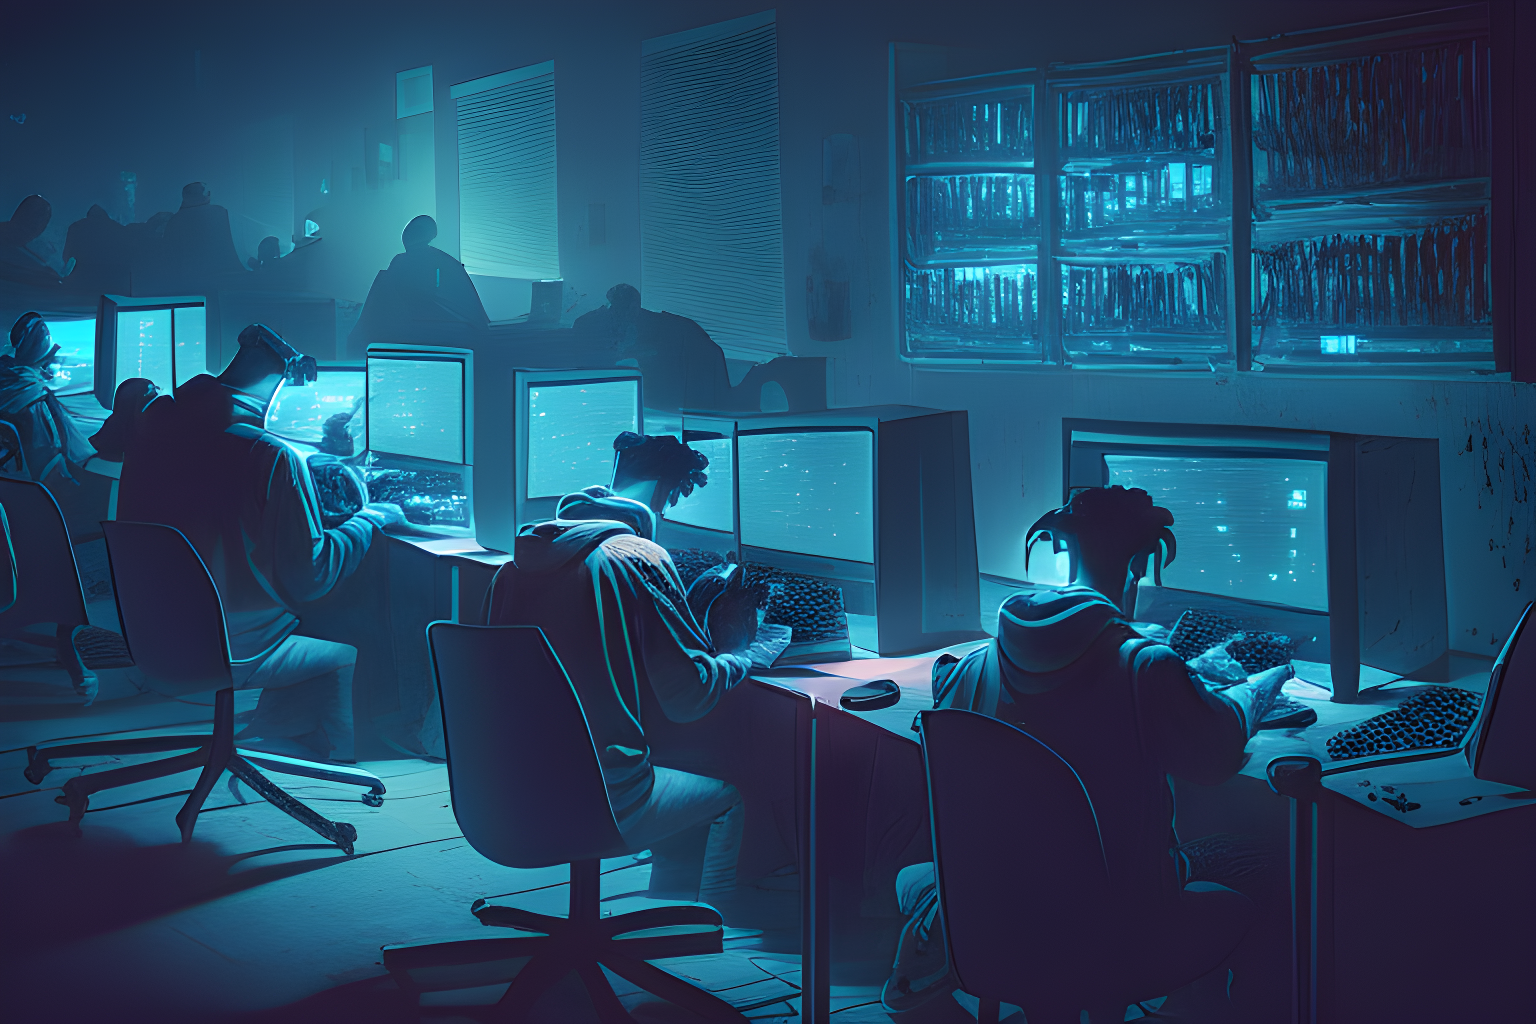 people on computers in an internet cafe at nighttime